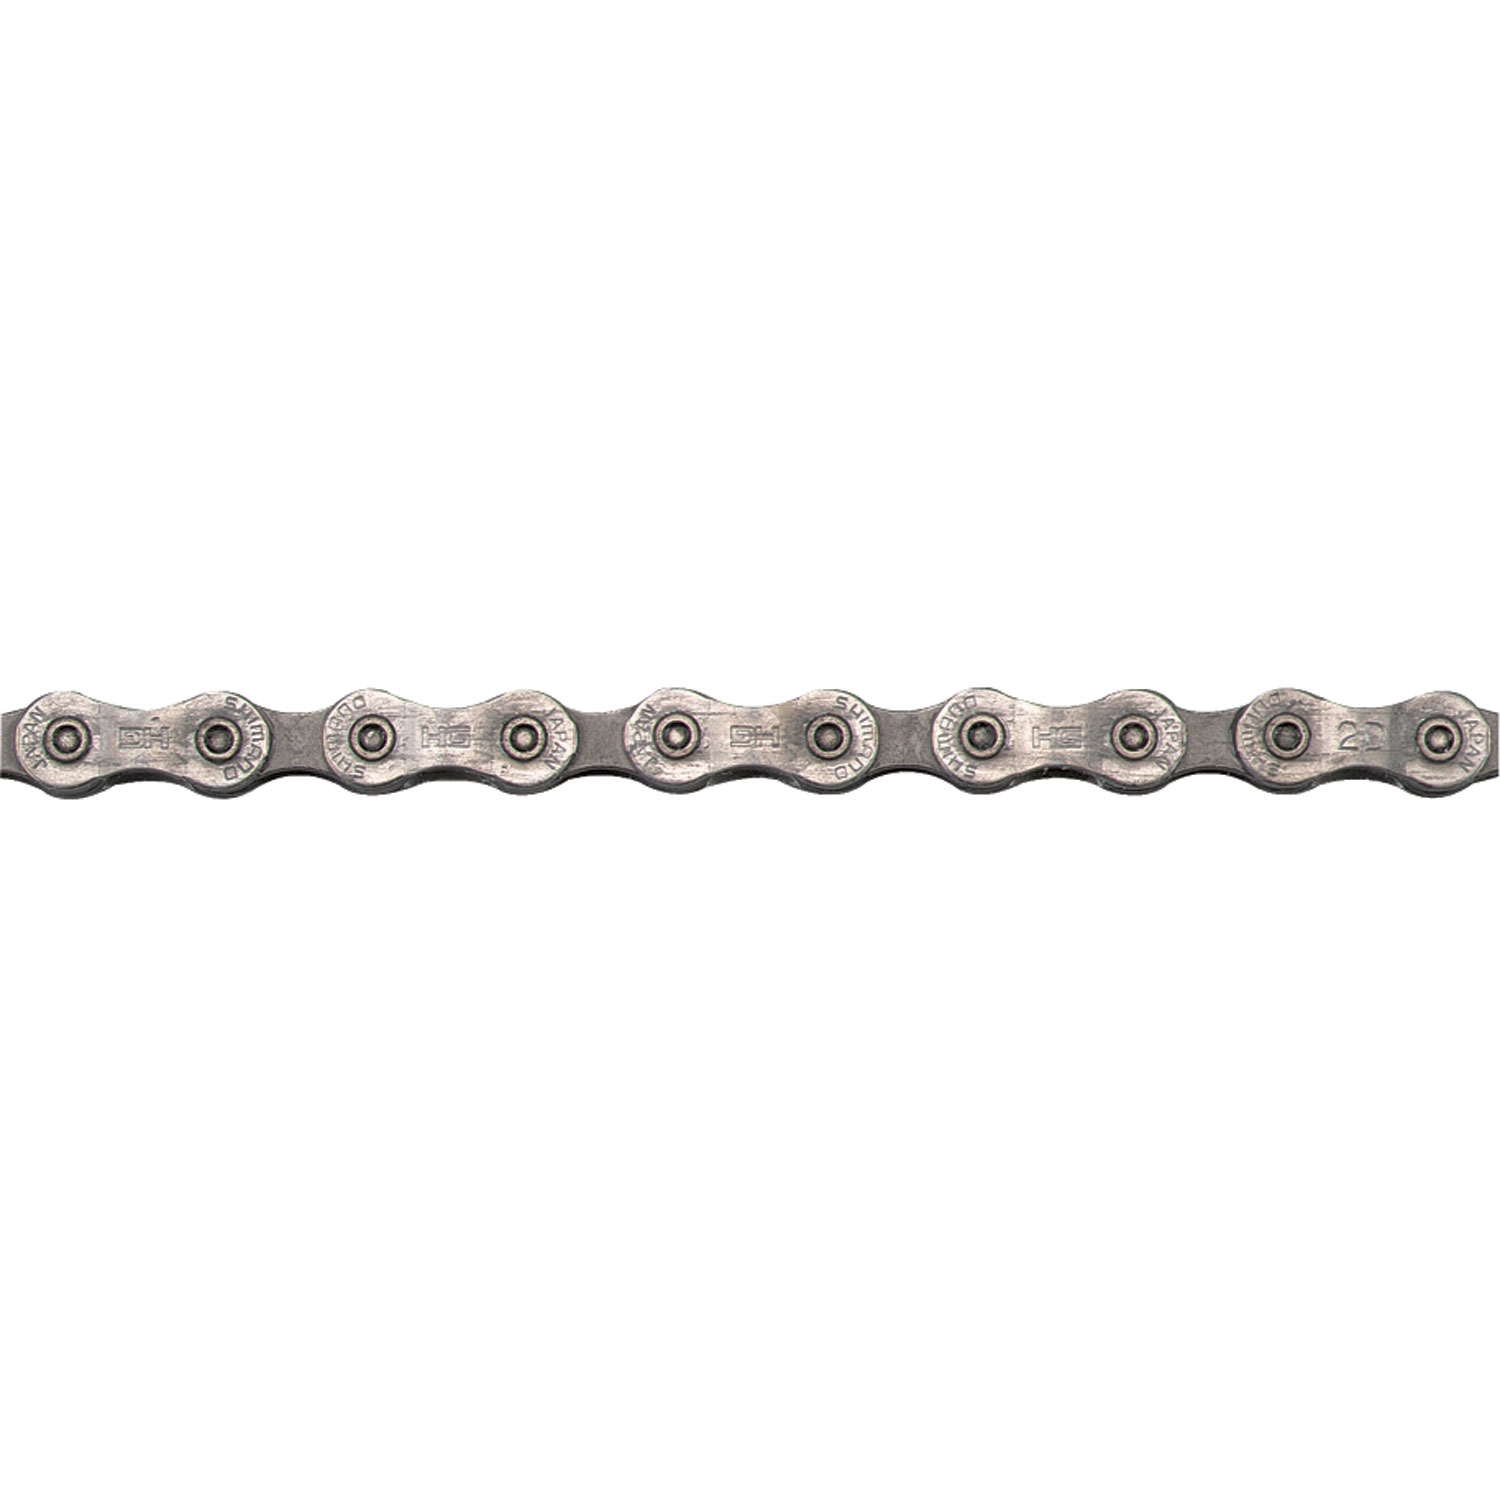 Sale on Shimano Chain Hg93 Hyperglide (HG) series 9-speed compatible chain, recommended for Ultegra, Deore and Nexave C900/C600 drivetrains For All type of Bicycles, Mountain Bikes, Mountain Bicycles, Enduro, Gravel